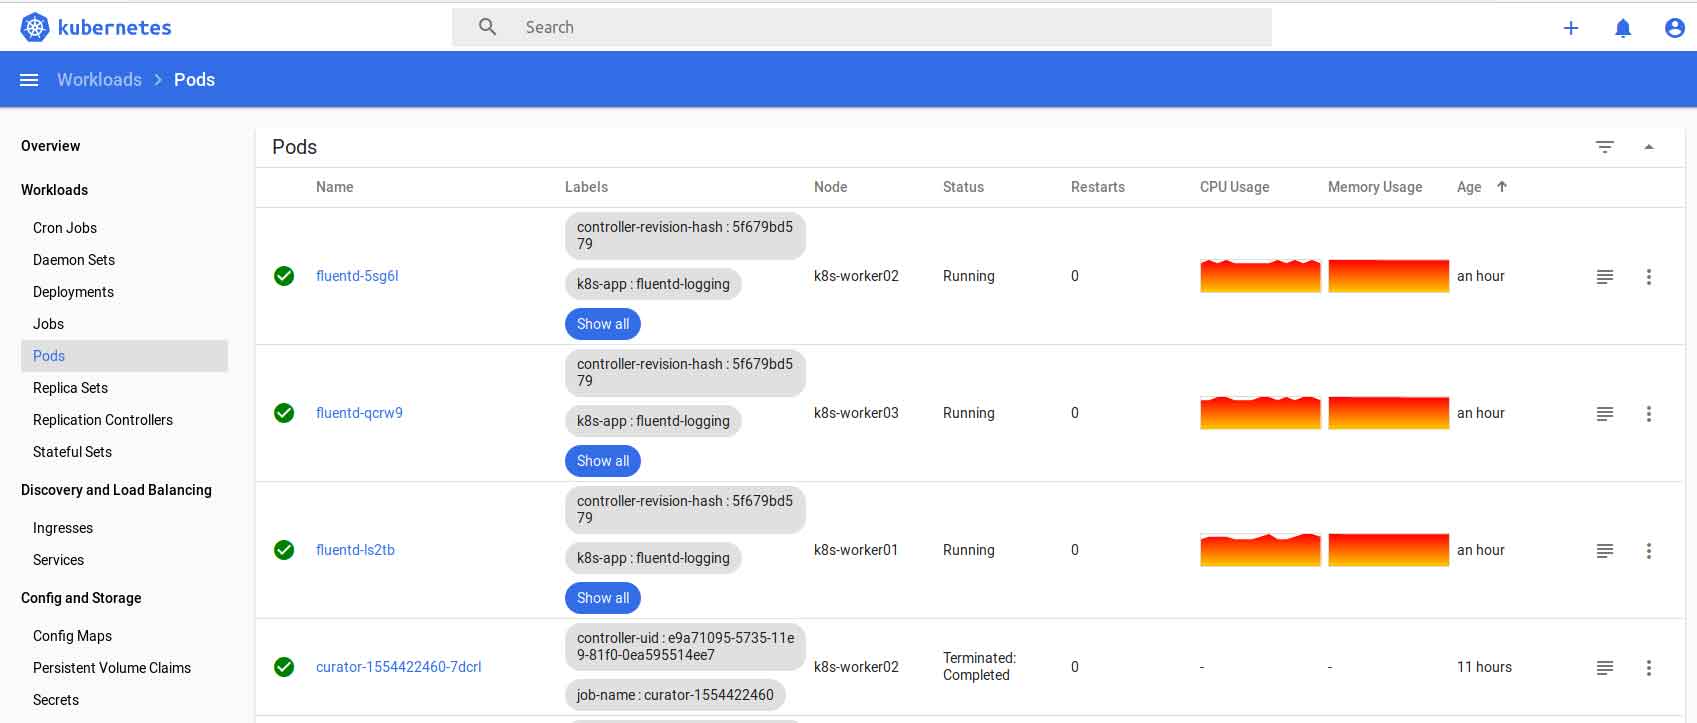 kubernetes dashboard features include loads of features